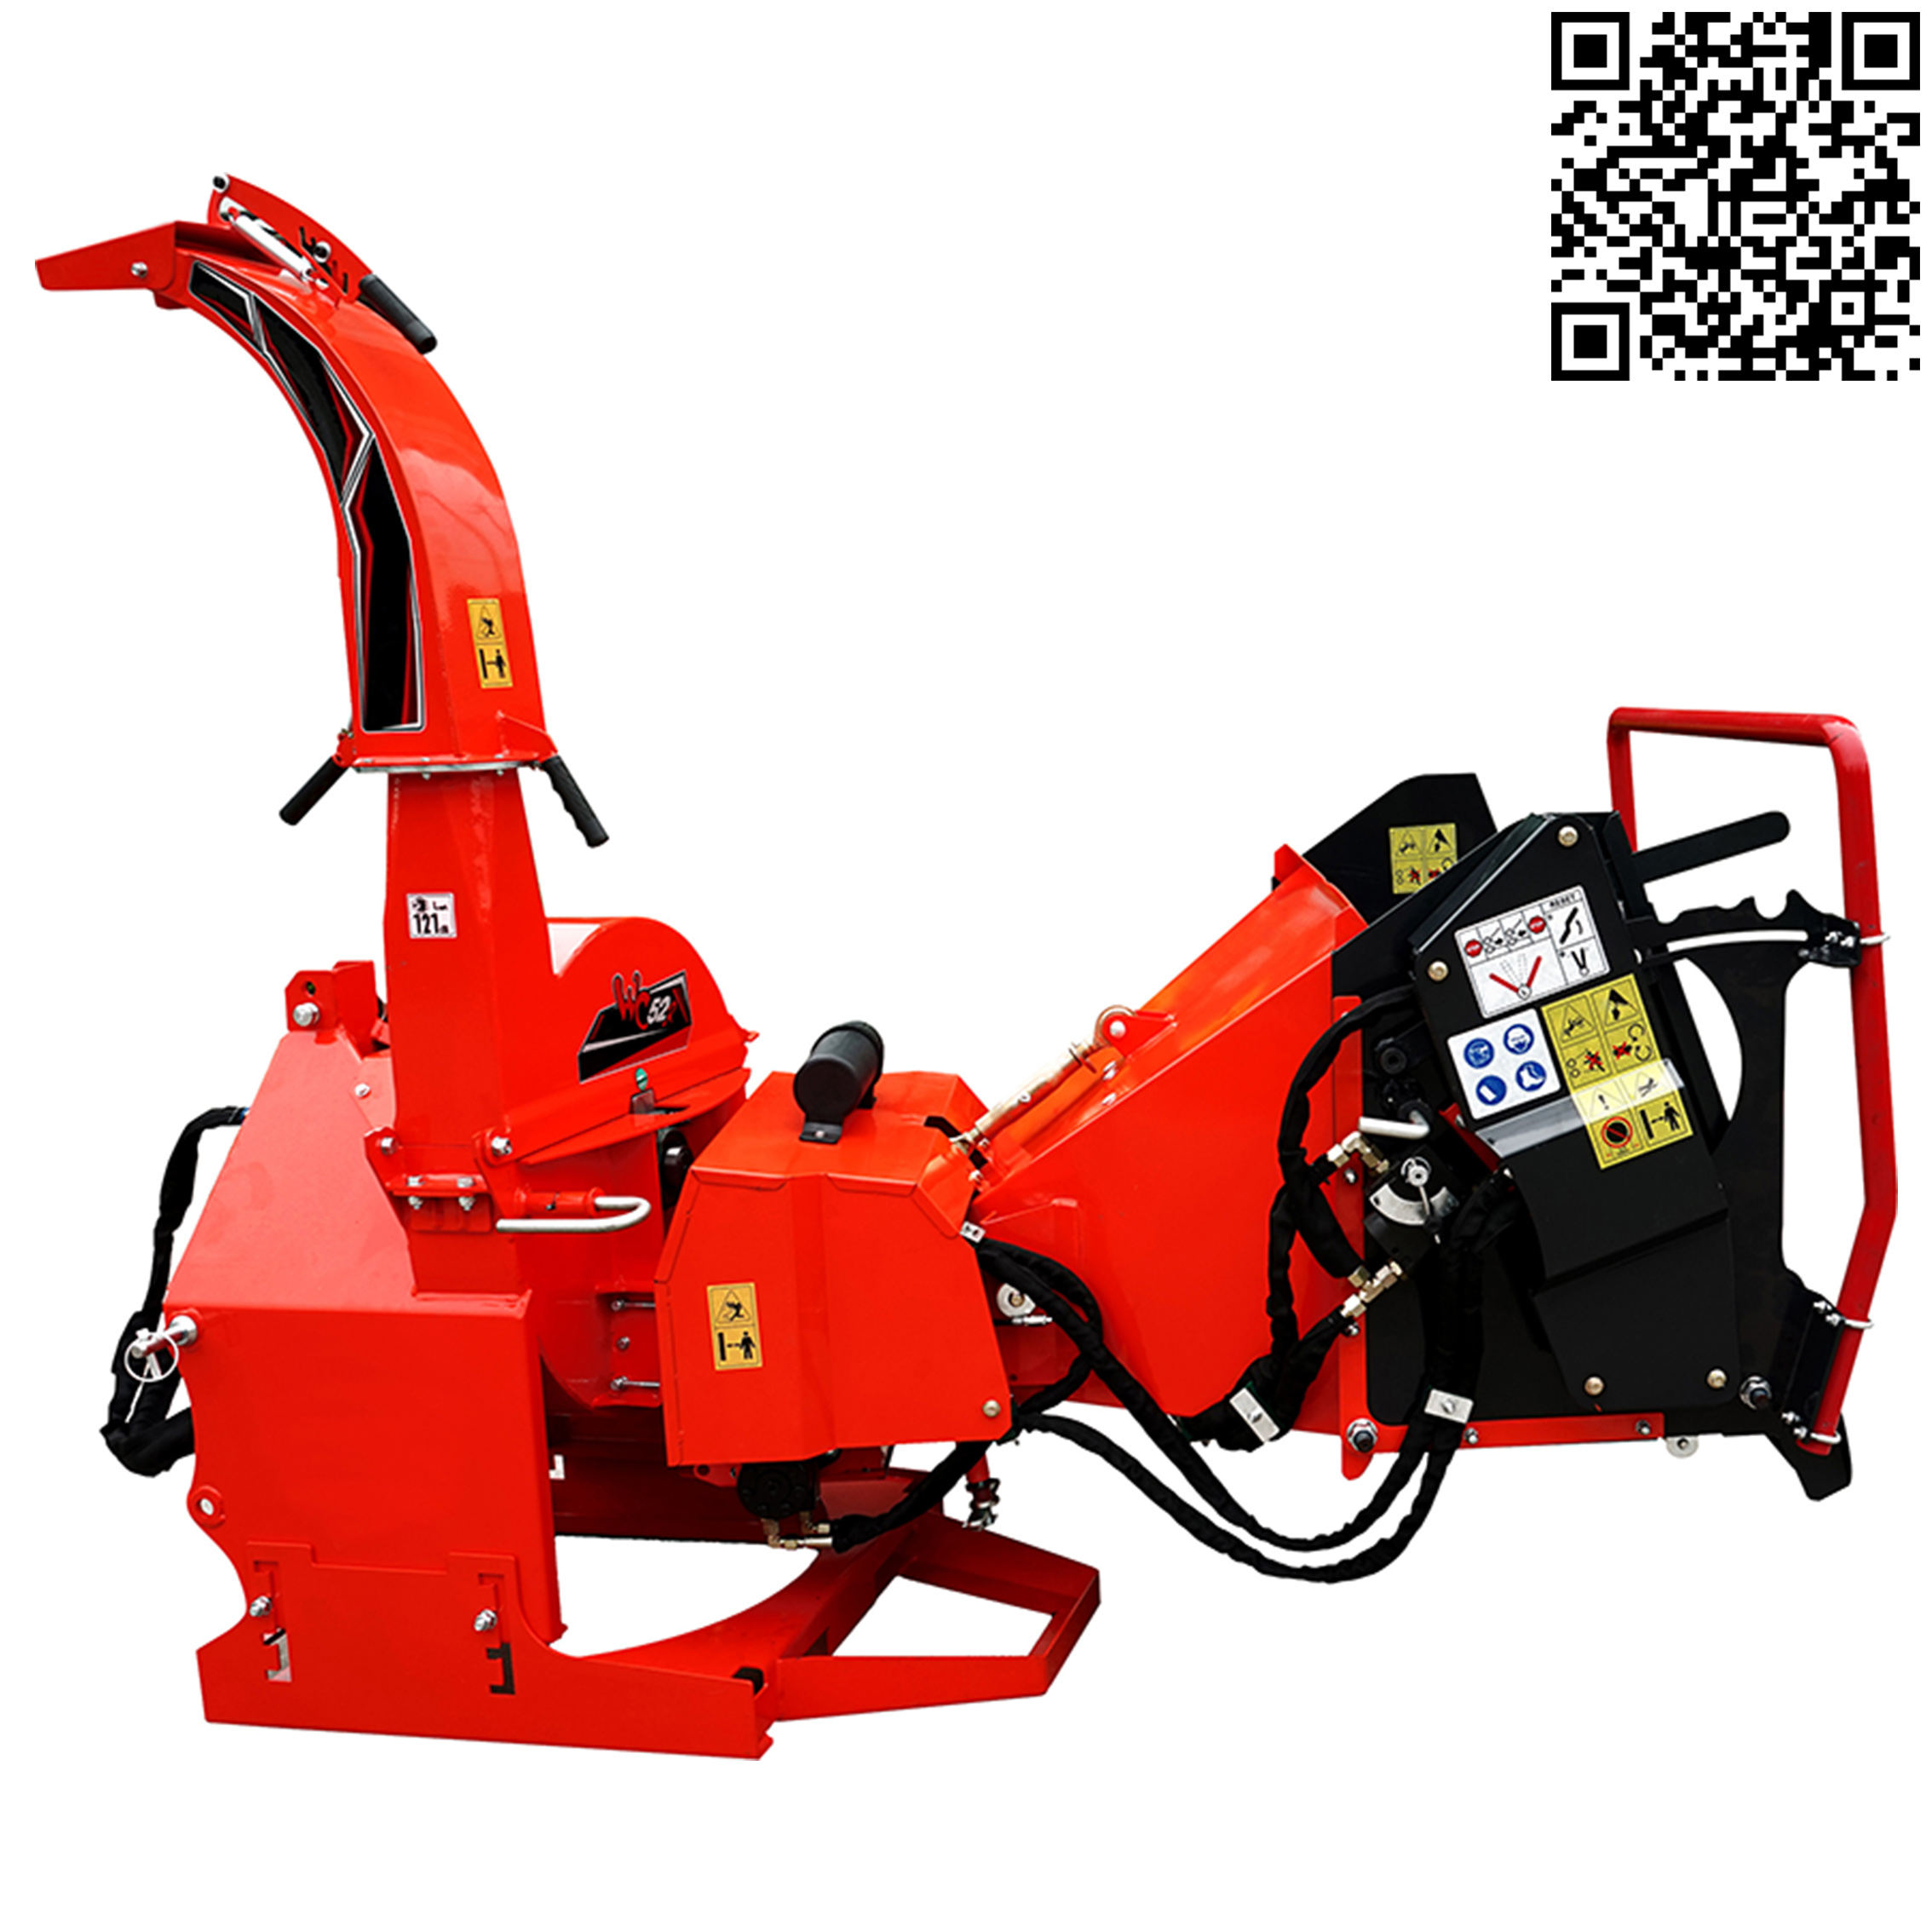 AGRICULTURAL WOOD CHIPPER